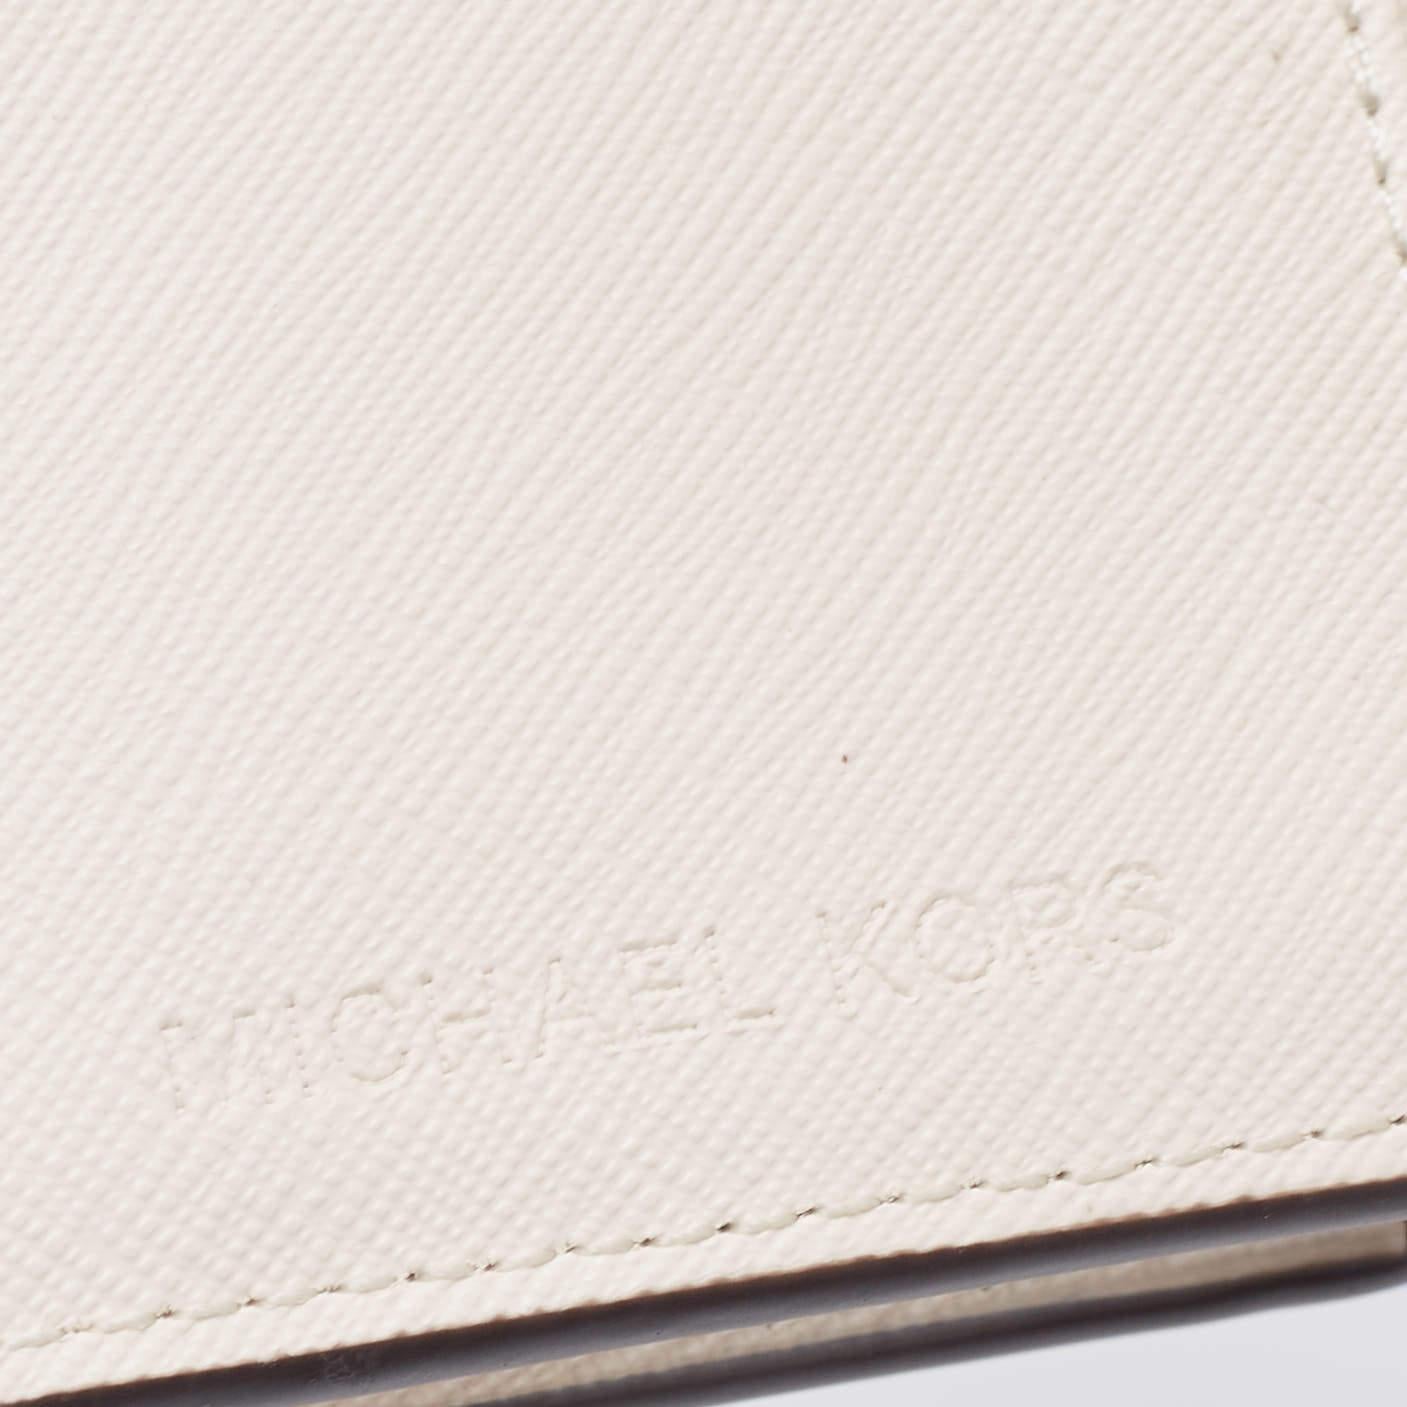 Michael Kors White Saffiano Leather Travel Jet Set French Wallet 2